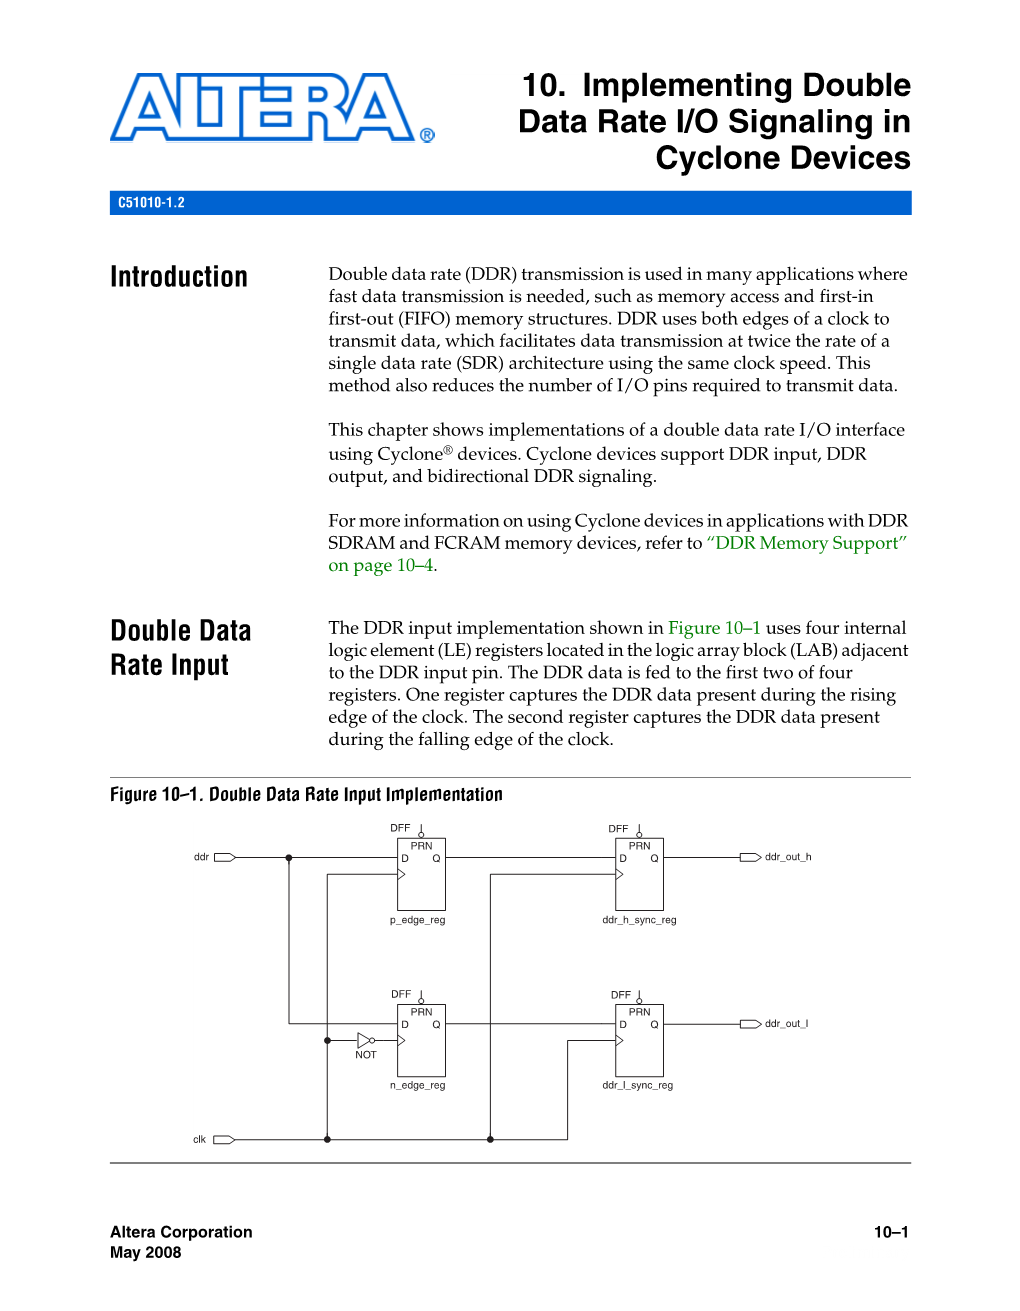 10. Implementing Double Data Rate I/O Signaling in Cyclone Devices